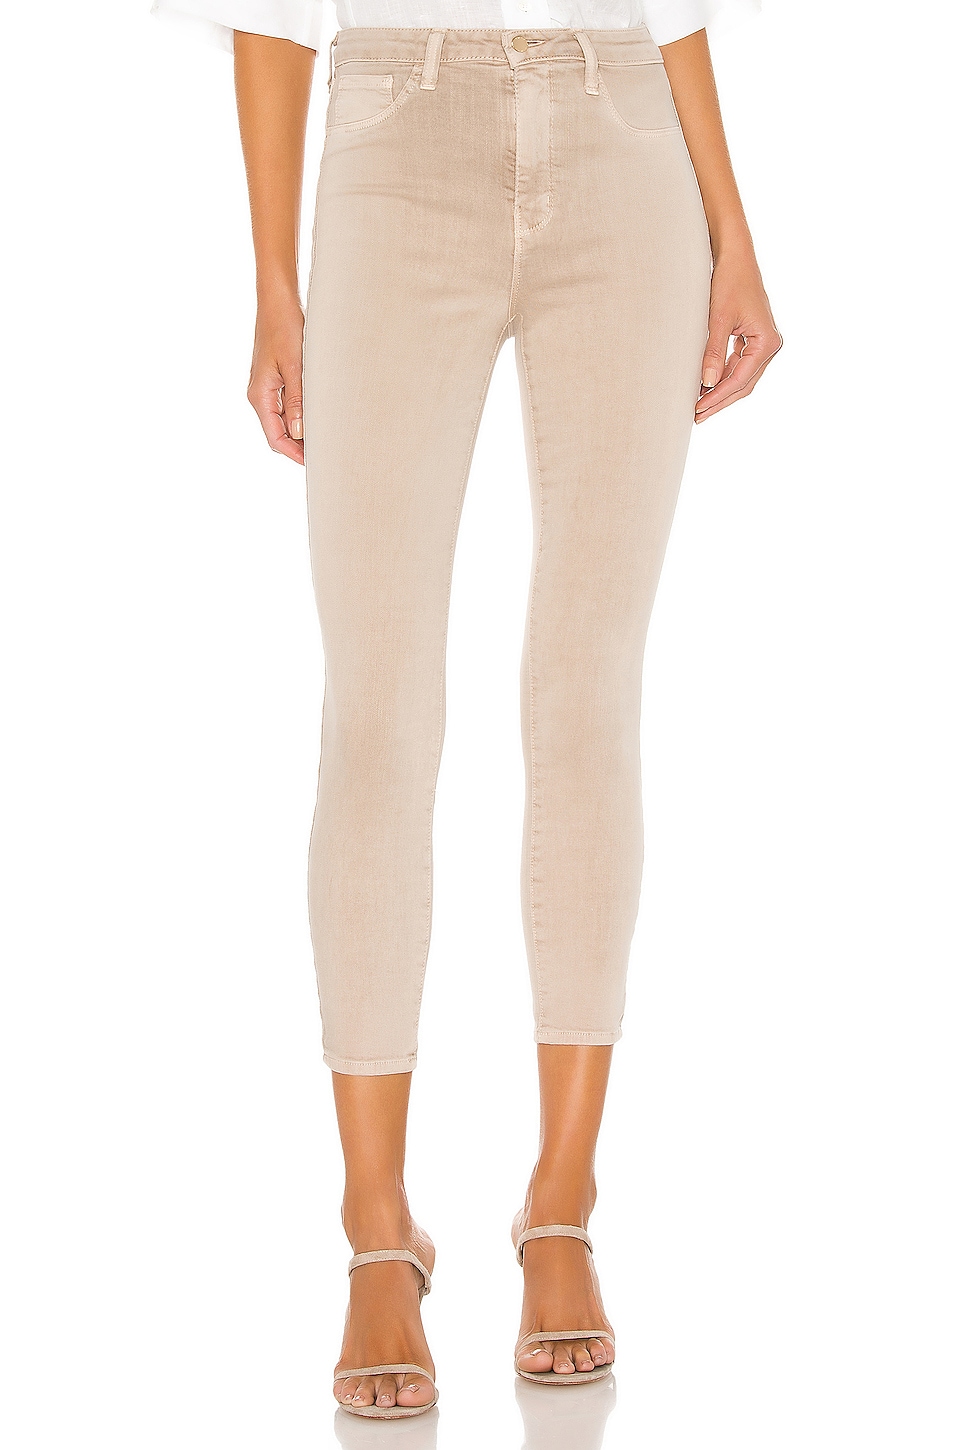 L'AGENCE Margot High Rise Skinny Biscuit